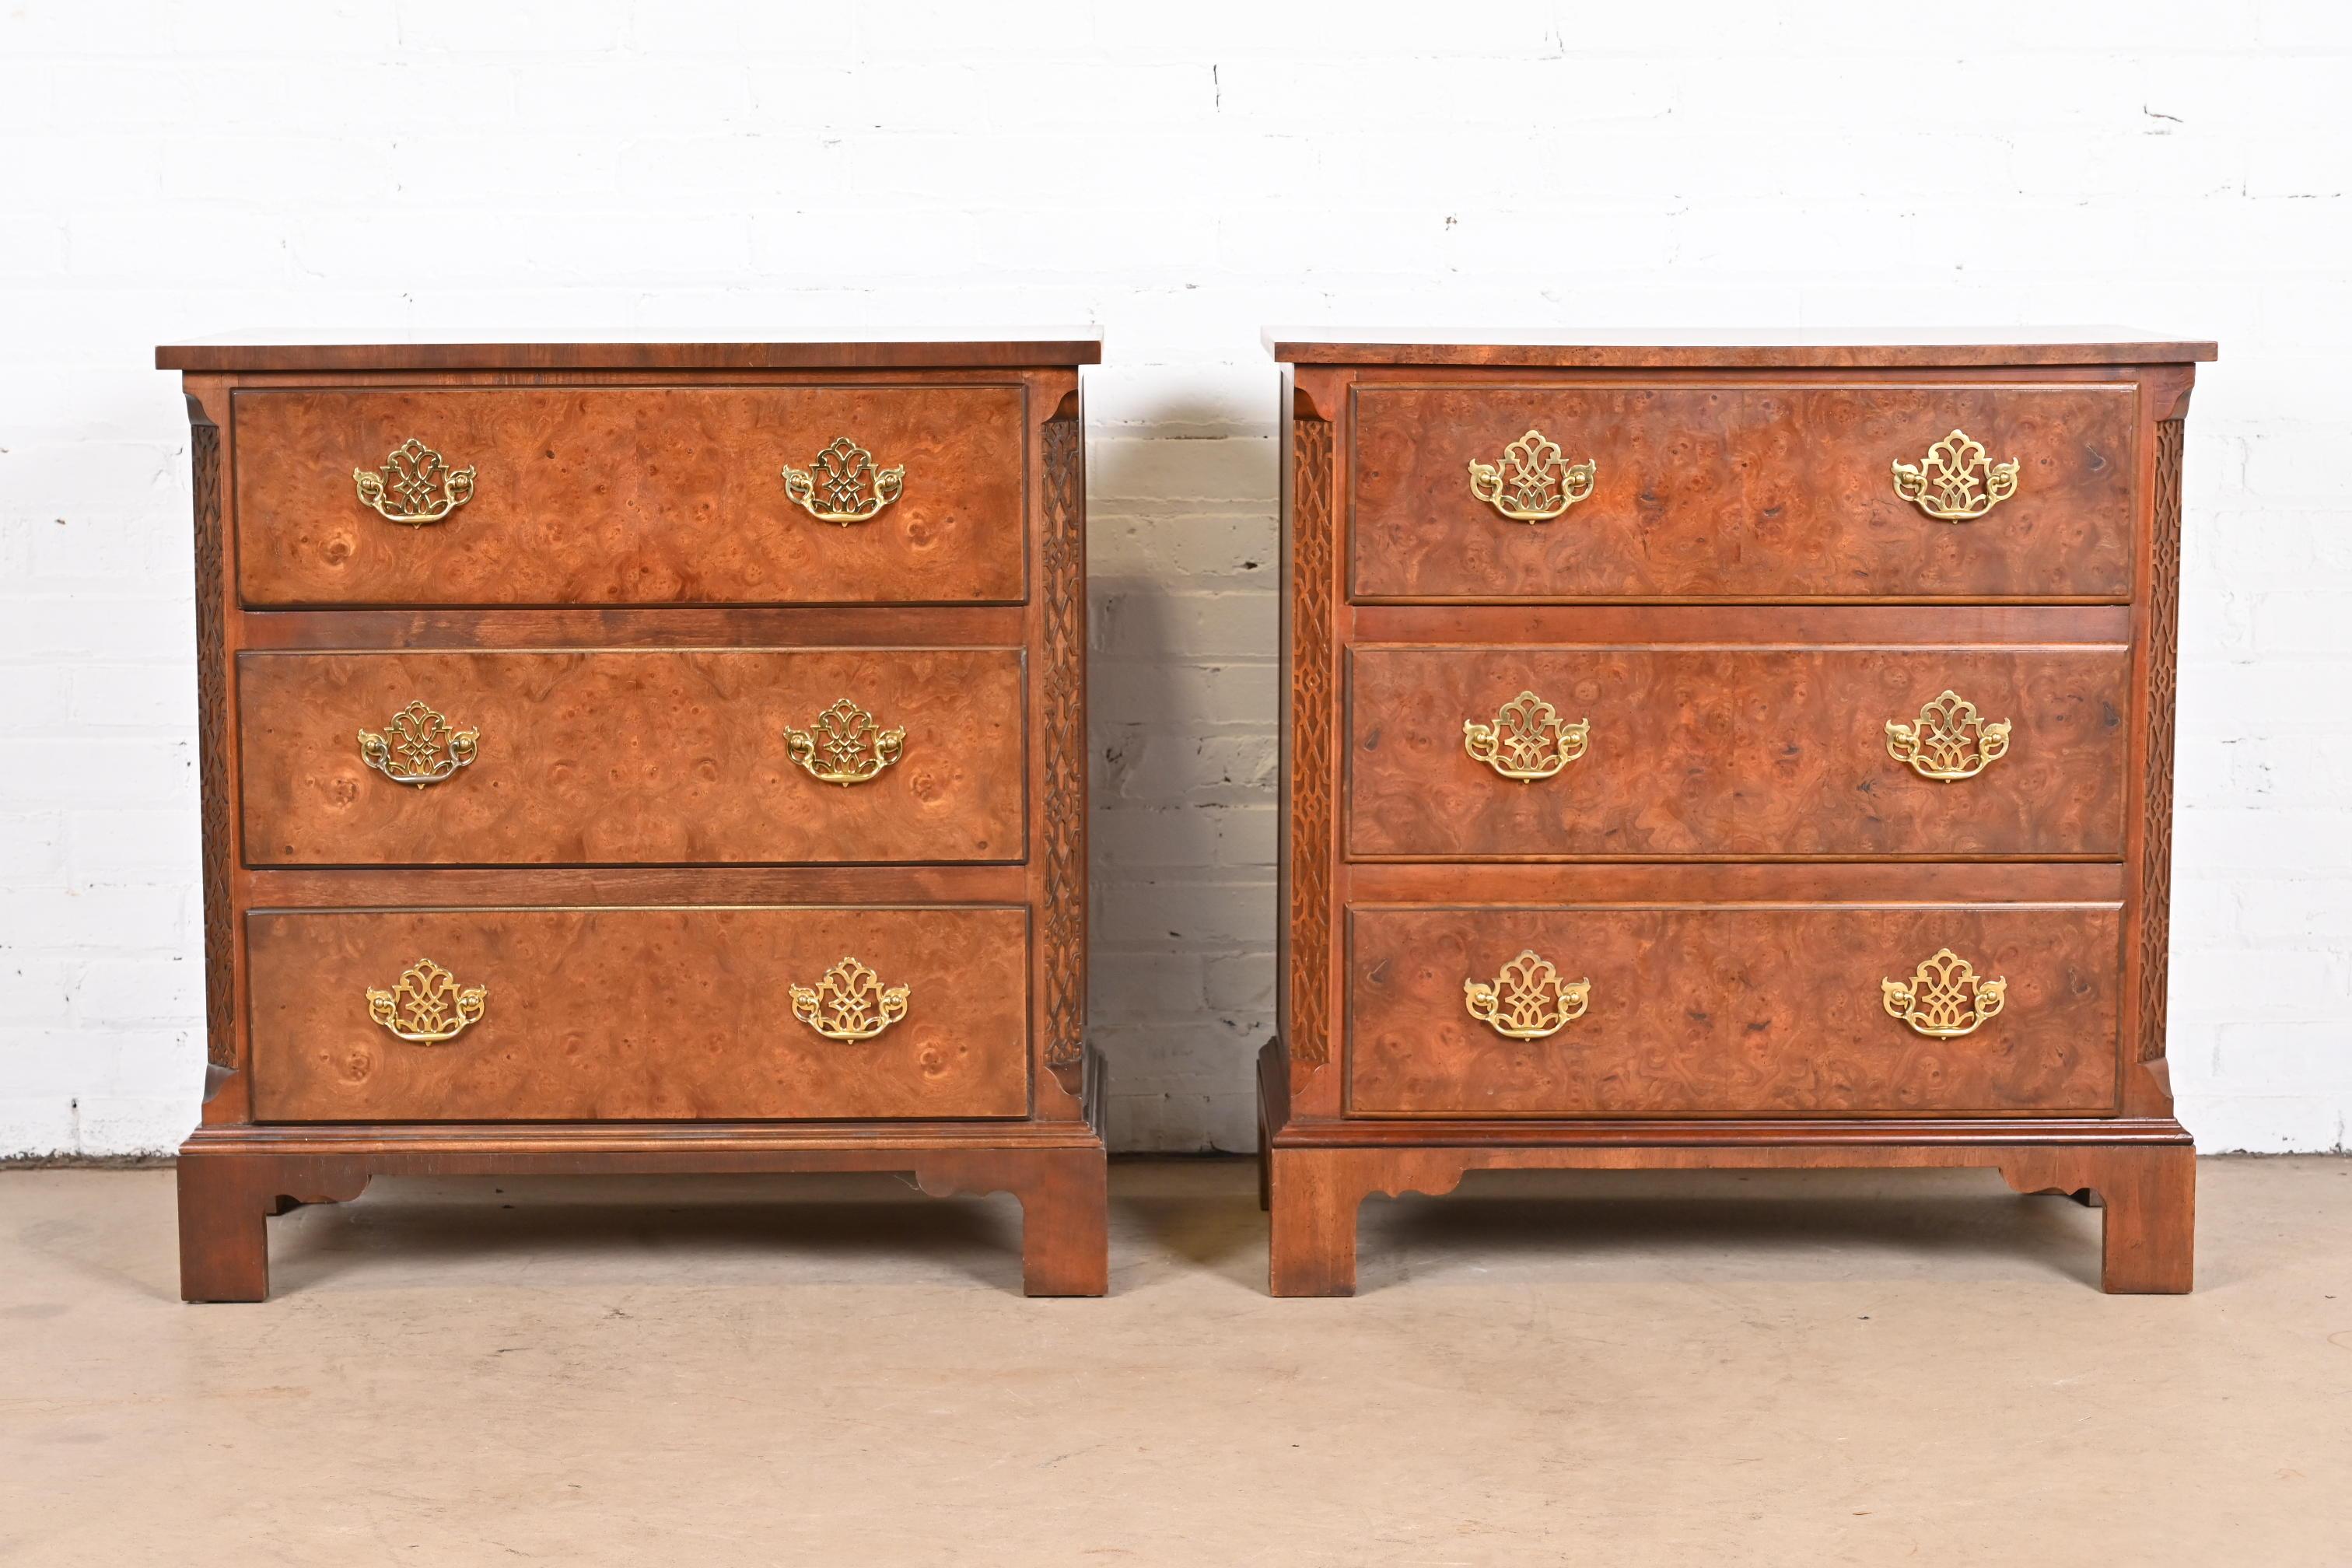 A beautiful pair of Georgian or Chippendale style three-drawer bachelor chests or nightstands

By Baker Furniture

USA, circa 1980s

Book-matched carved walnut cases, with gorgeous burled walnut drawer fronts and original brass